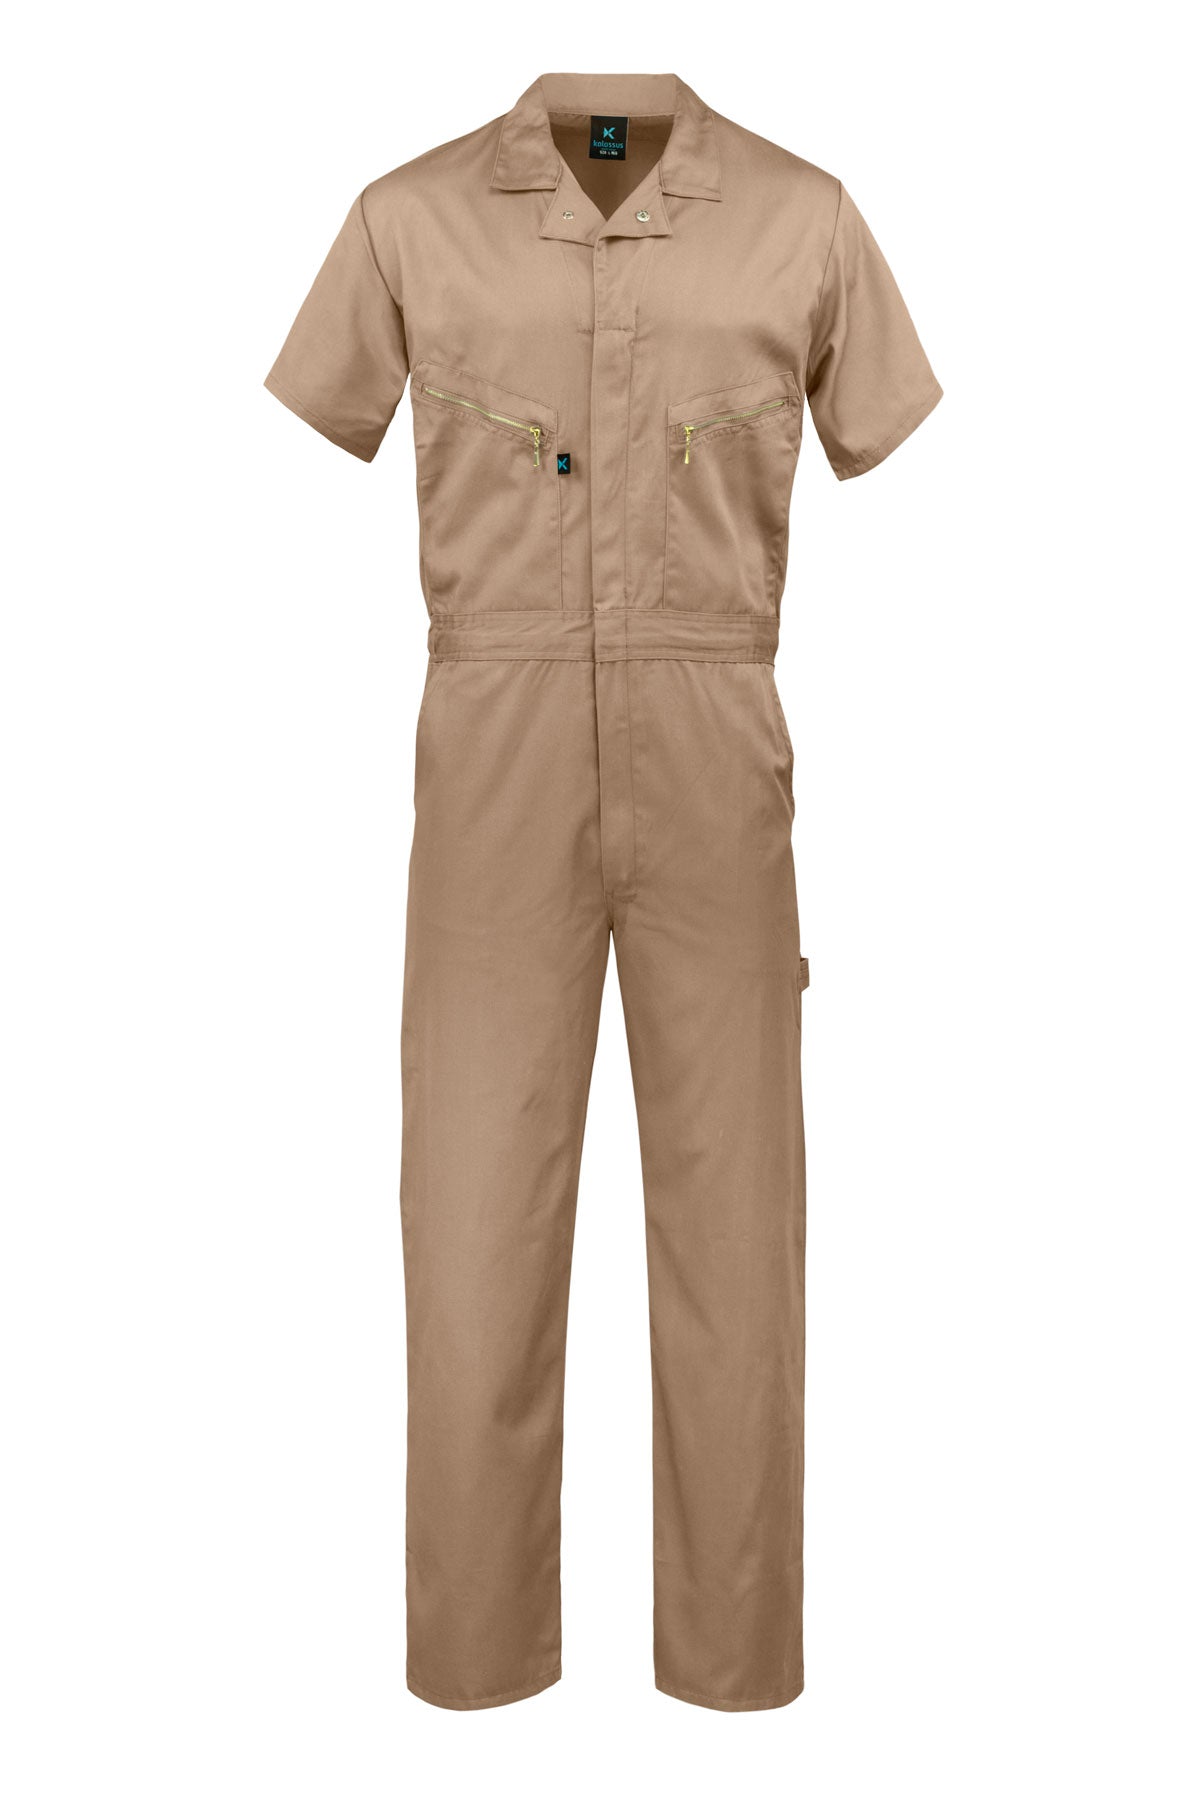 Kolossus Pro-Utility Cotton Blend Short Sleeve Coverall with Zip-Front